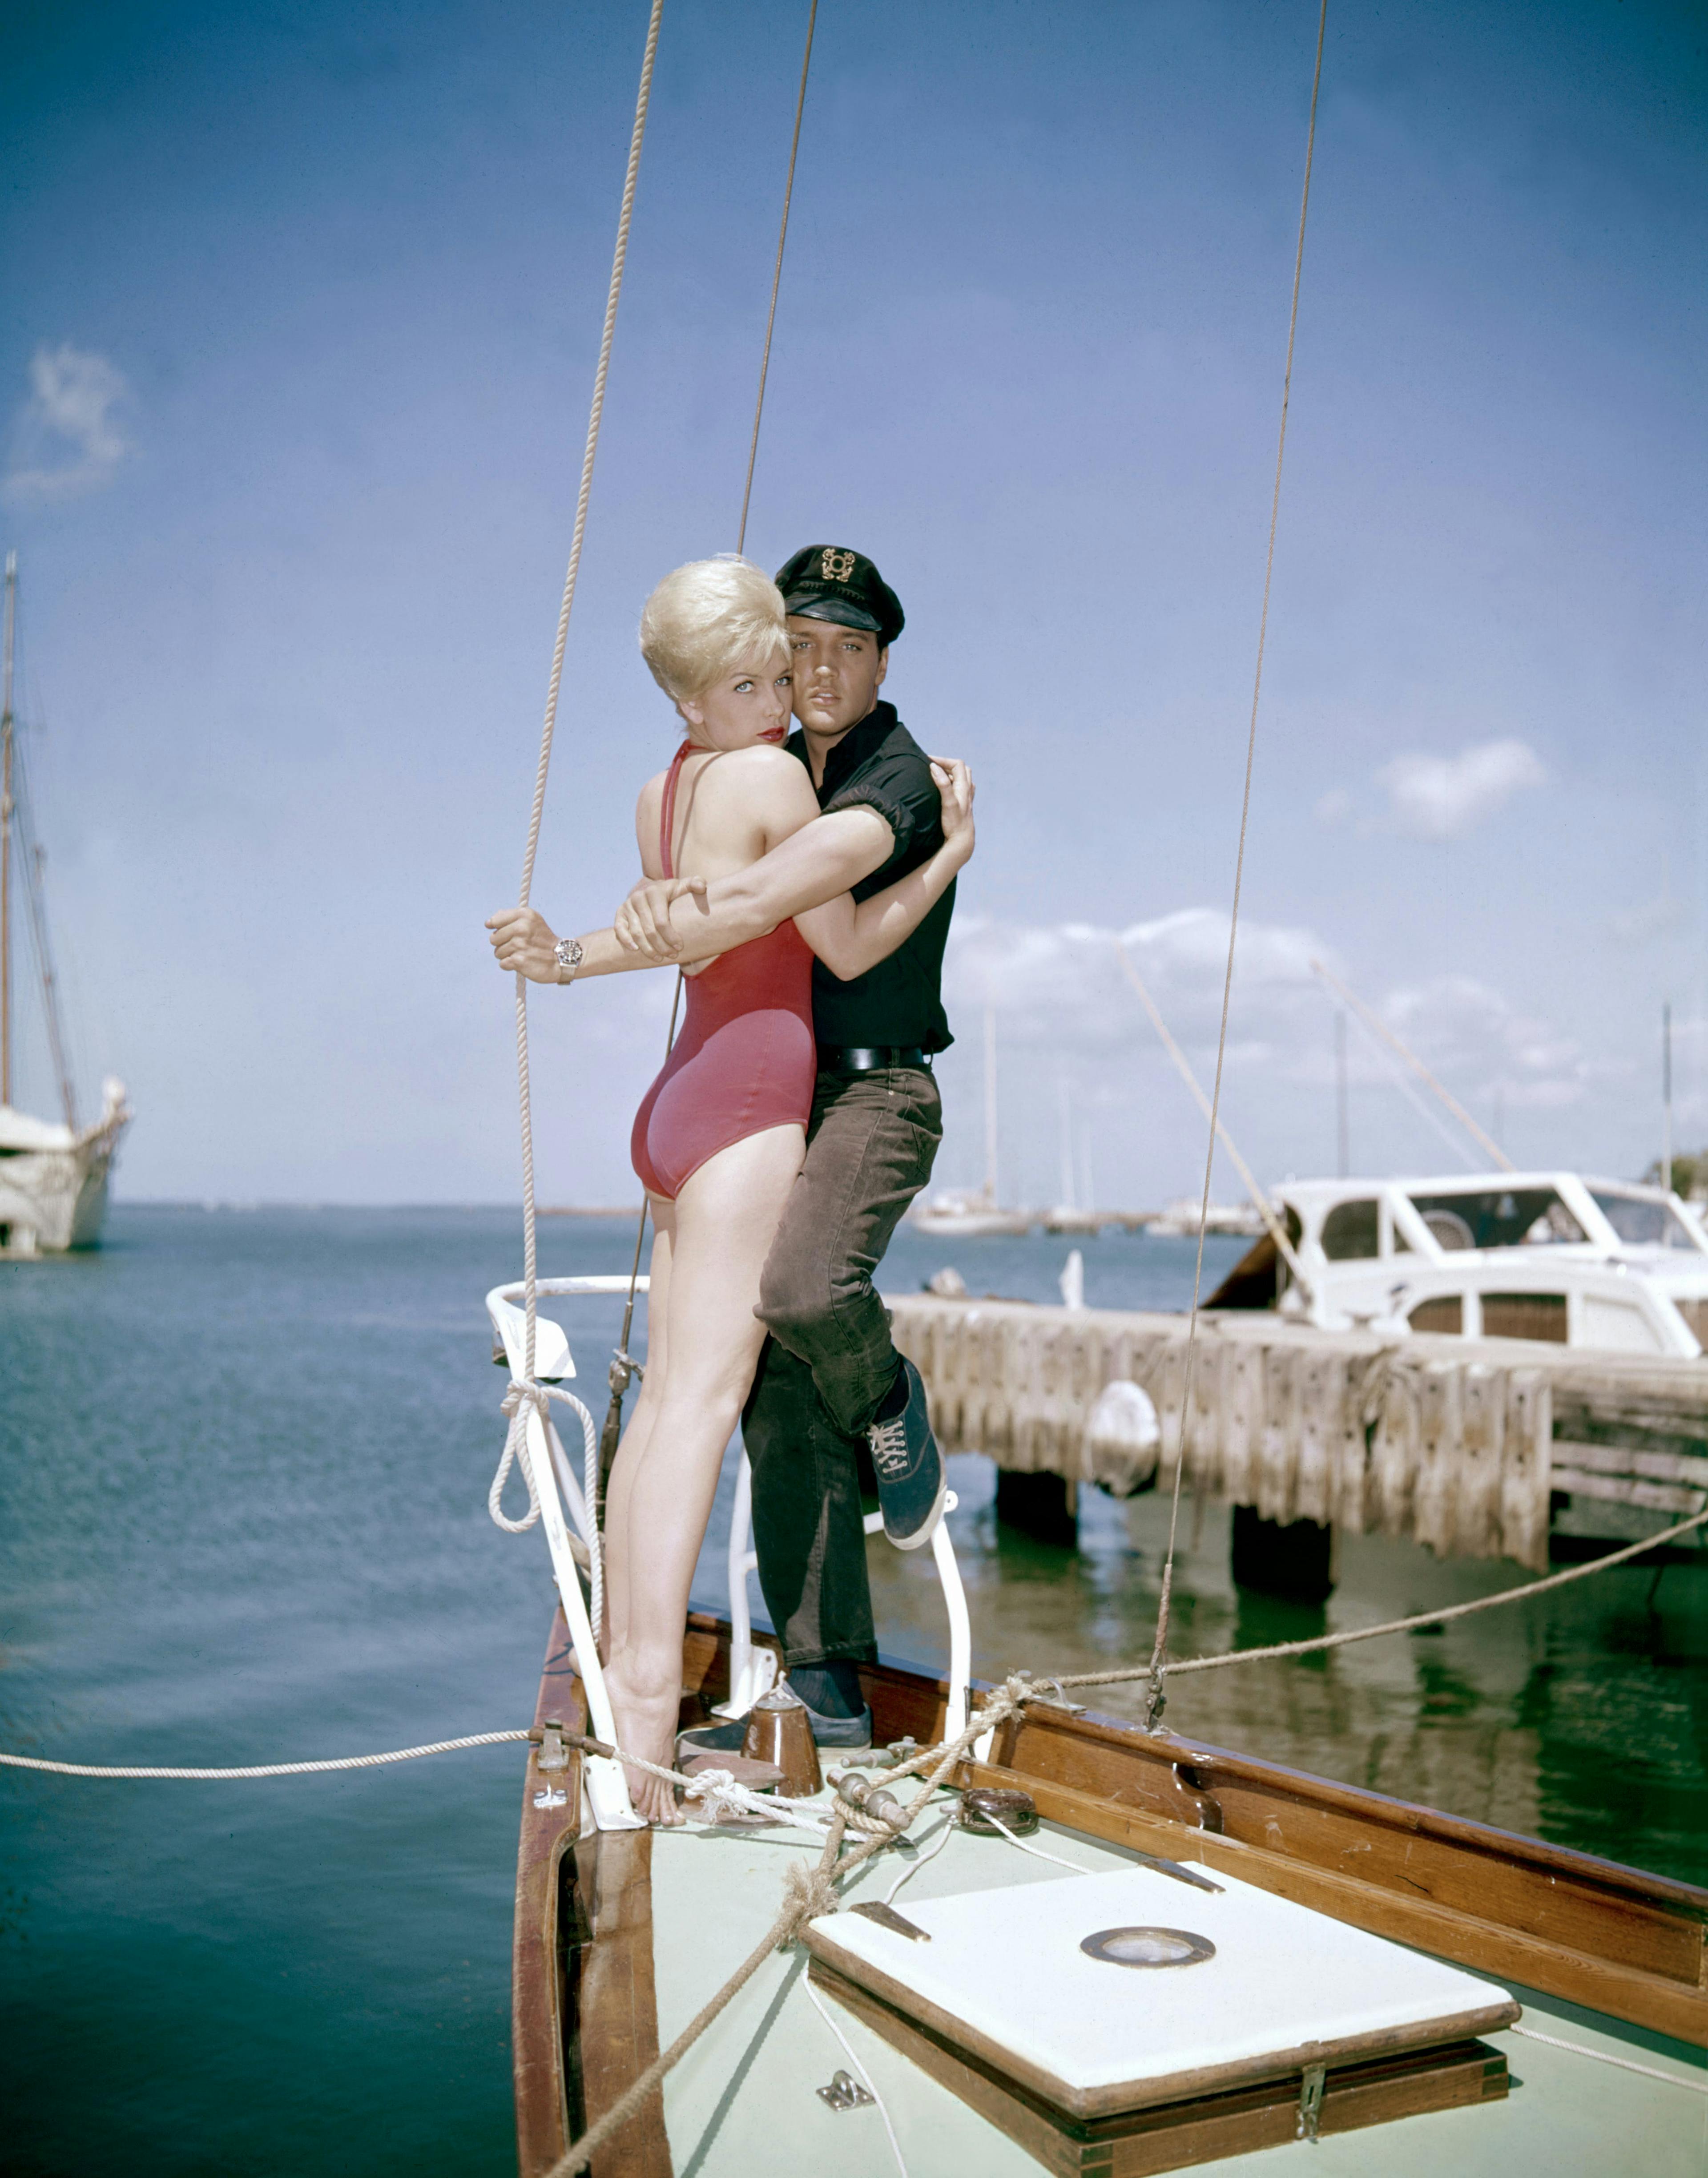 Elvis Presley and Stella Stevens on a boat.